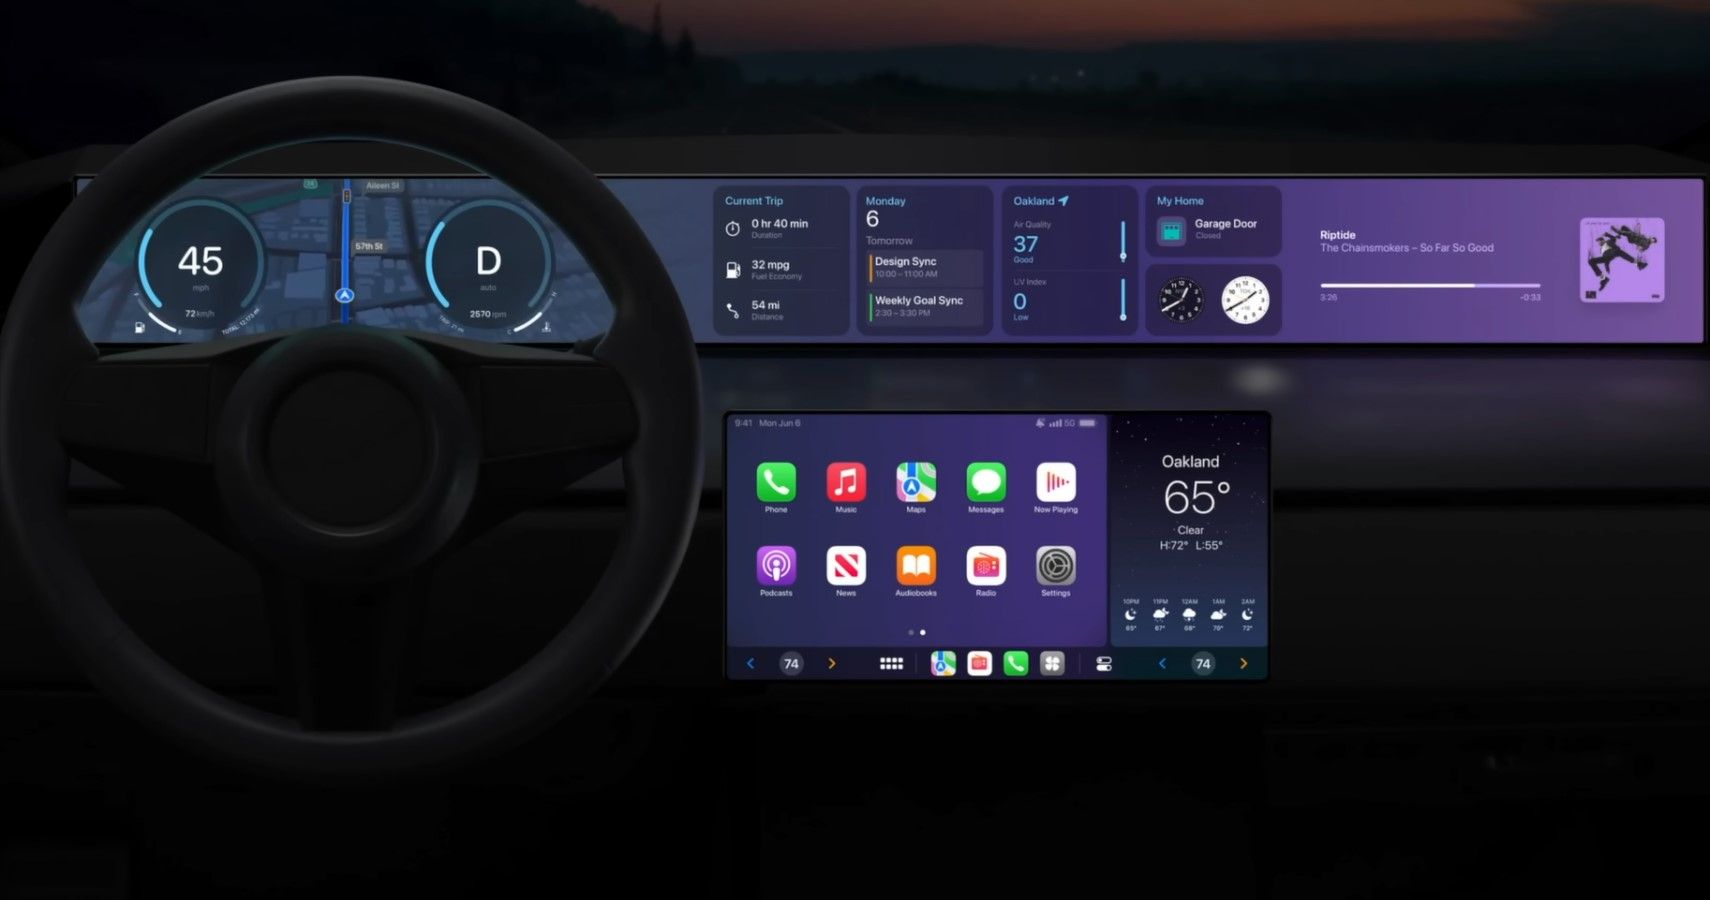 The future of Apple CarPlay is very exciting